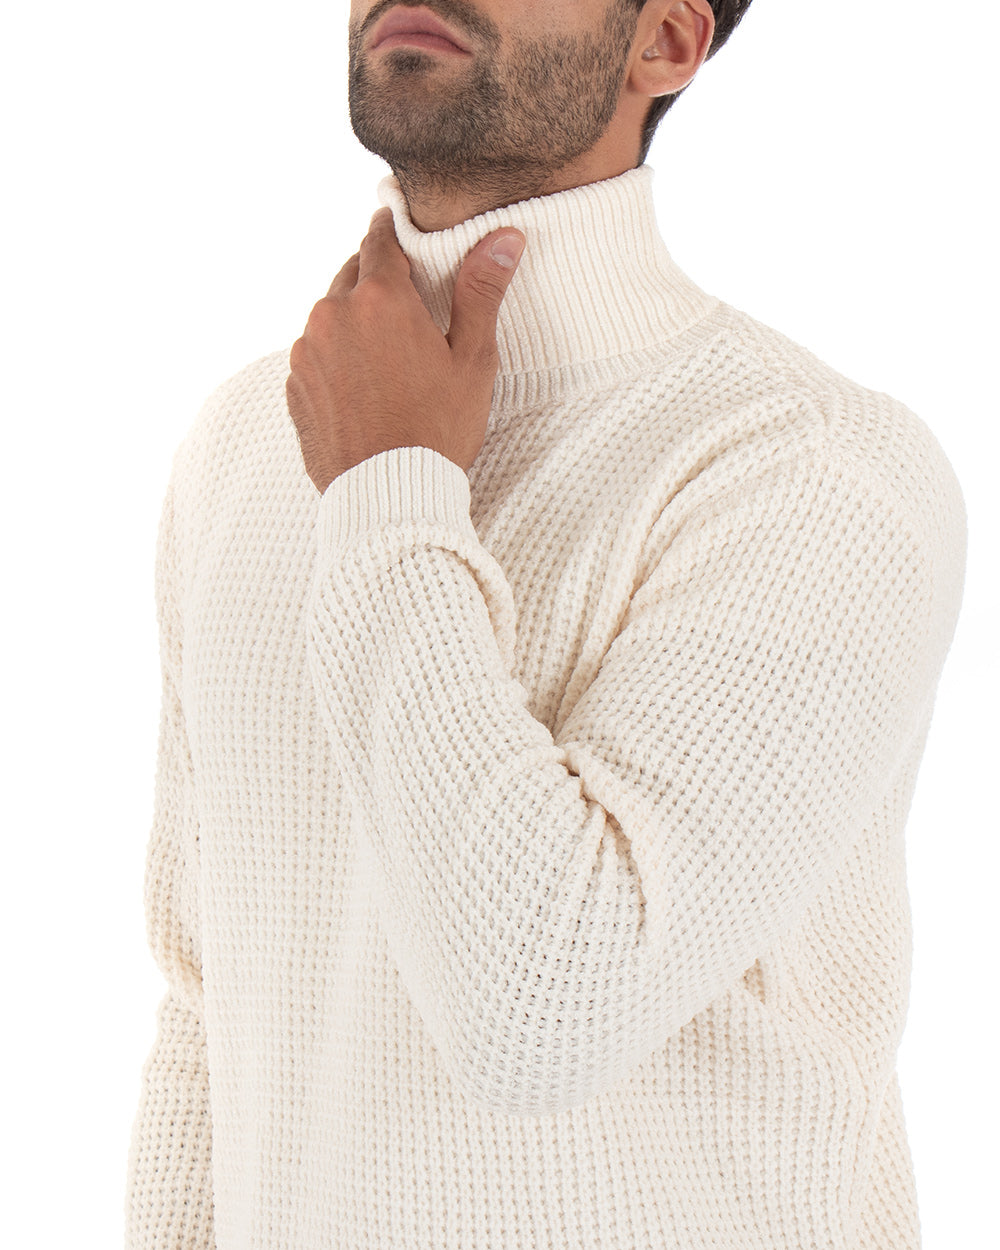 Men's Long Sleeved Chenille Sweater Solid Color Cream High Neck GIOSAL